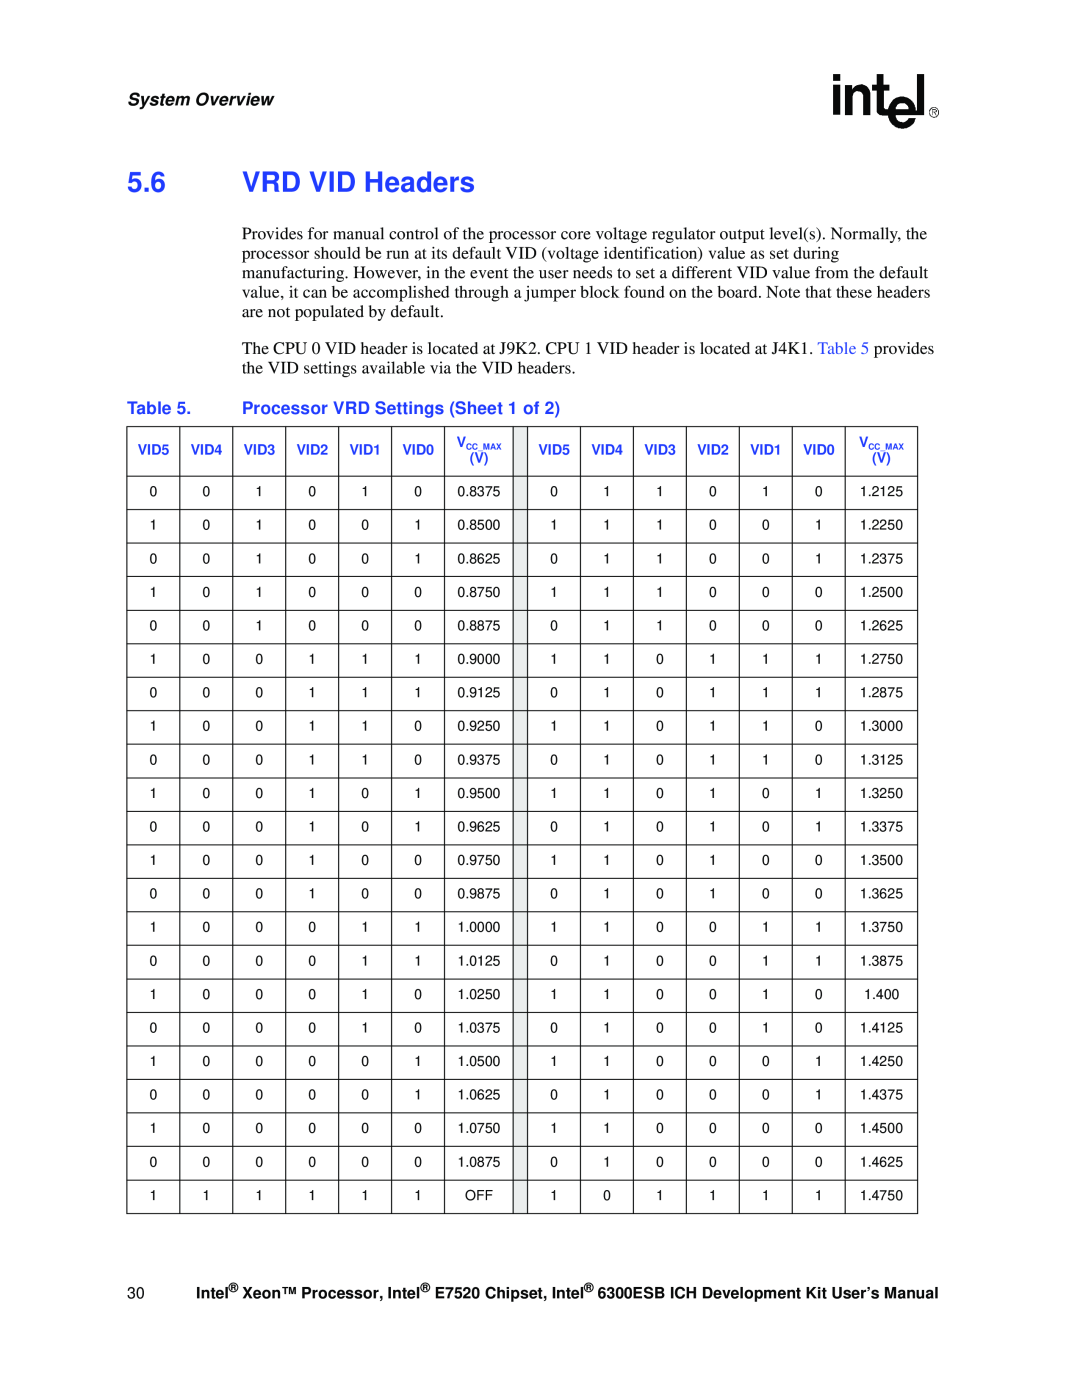 Intel Xeon, 6300ESB ICH user manual VRD VID Headers, Processor VRD Settings Sheet 1 of, System Overview 